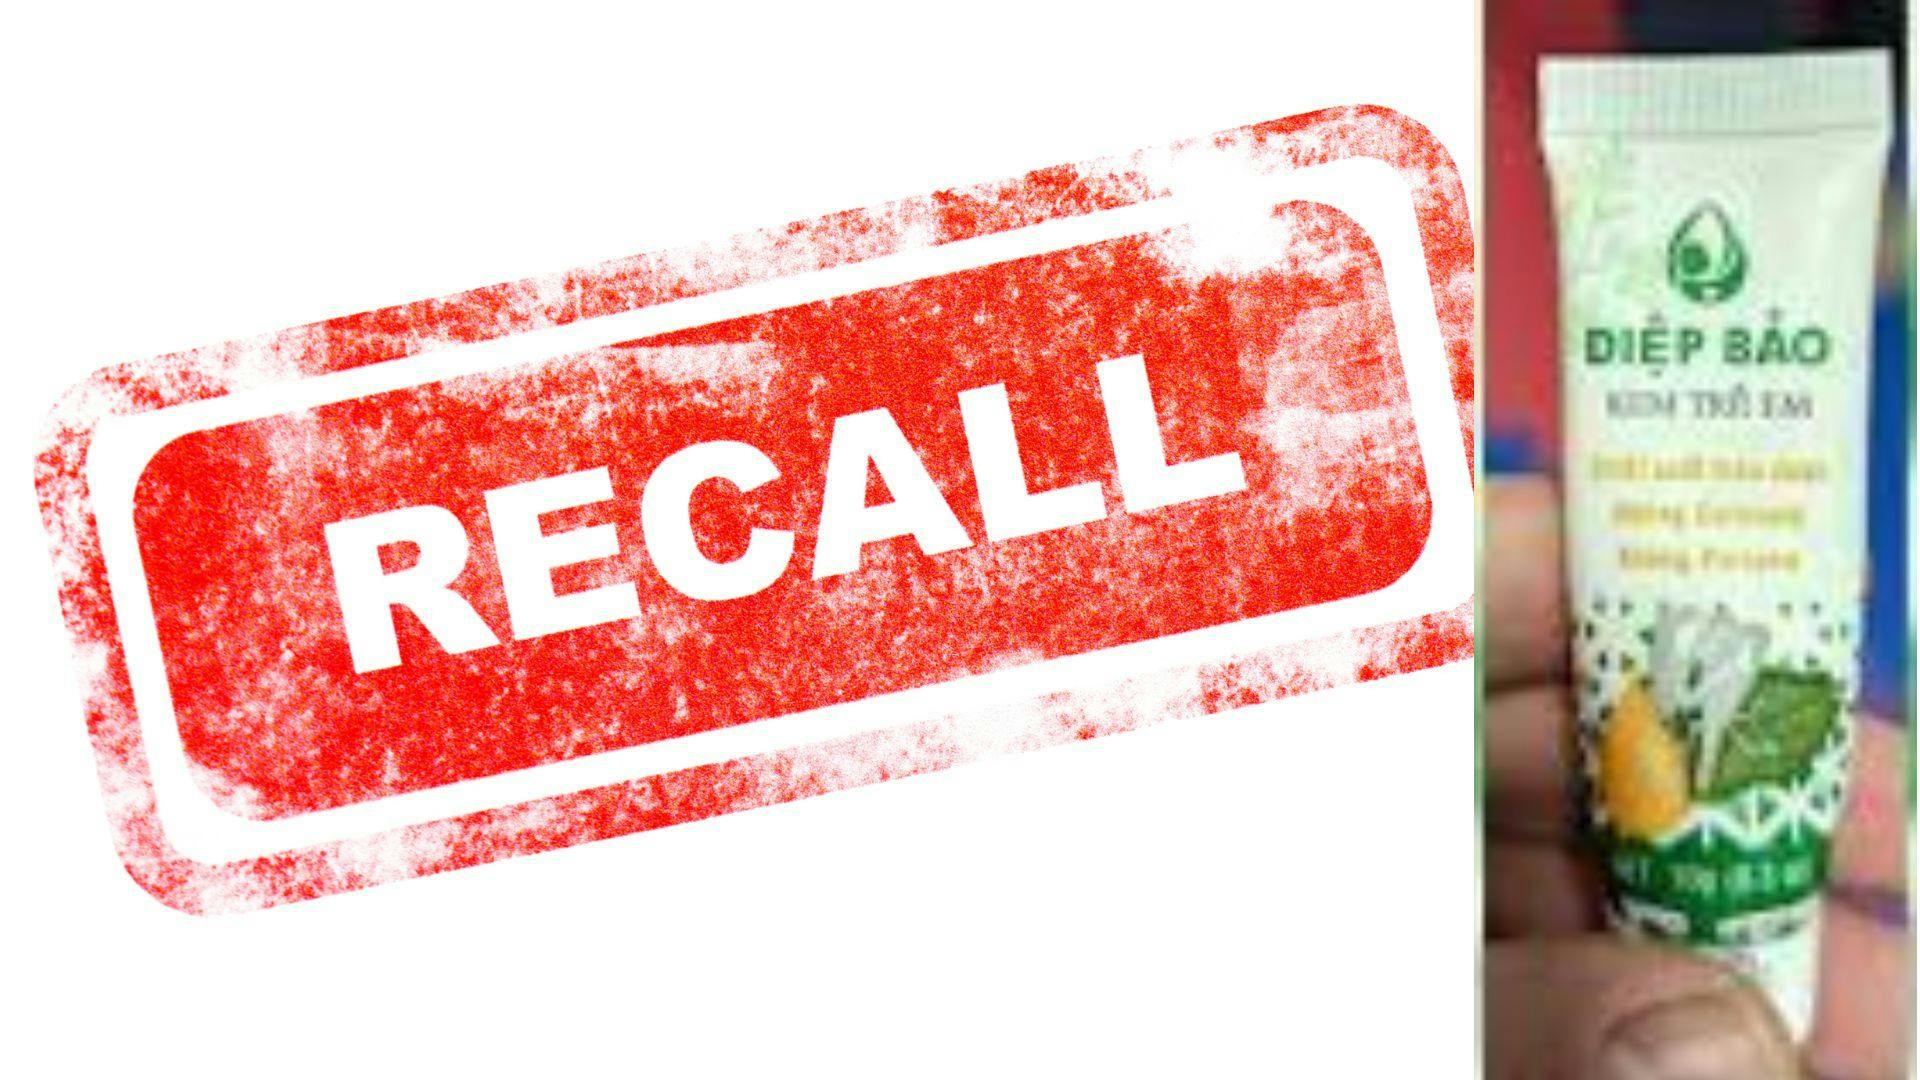 Diep Bao Cream Recalled Following Elevated Blood Lead Levels in Infants